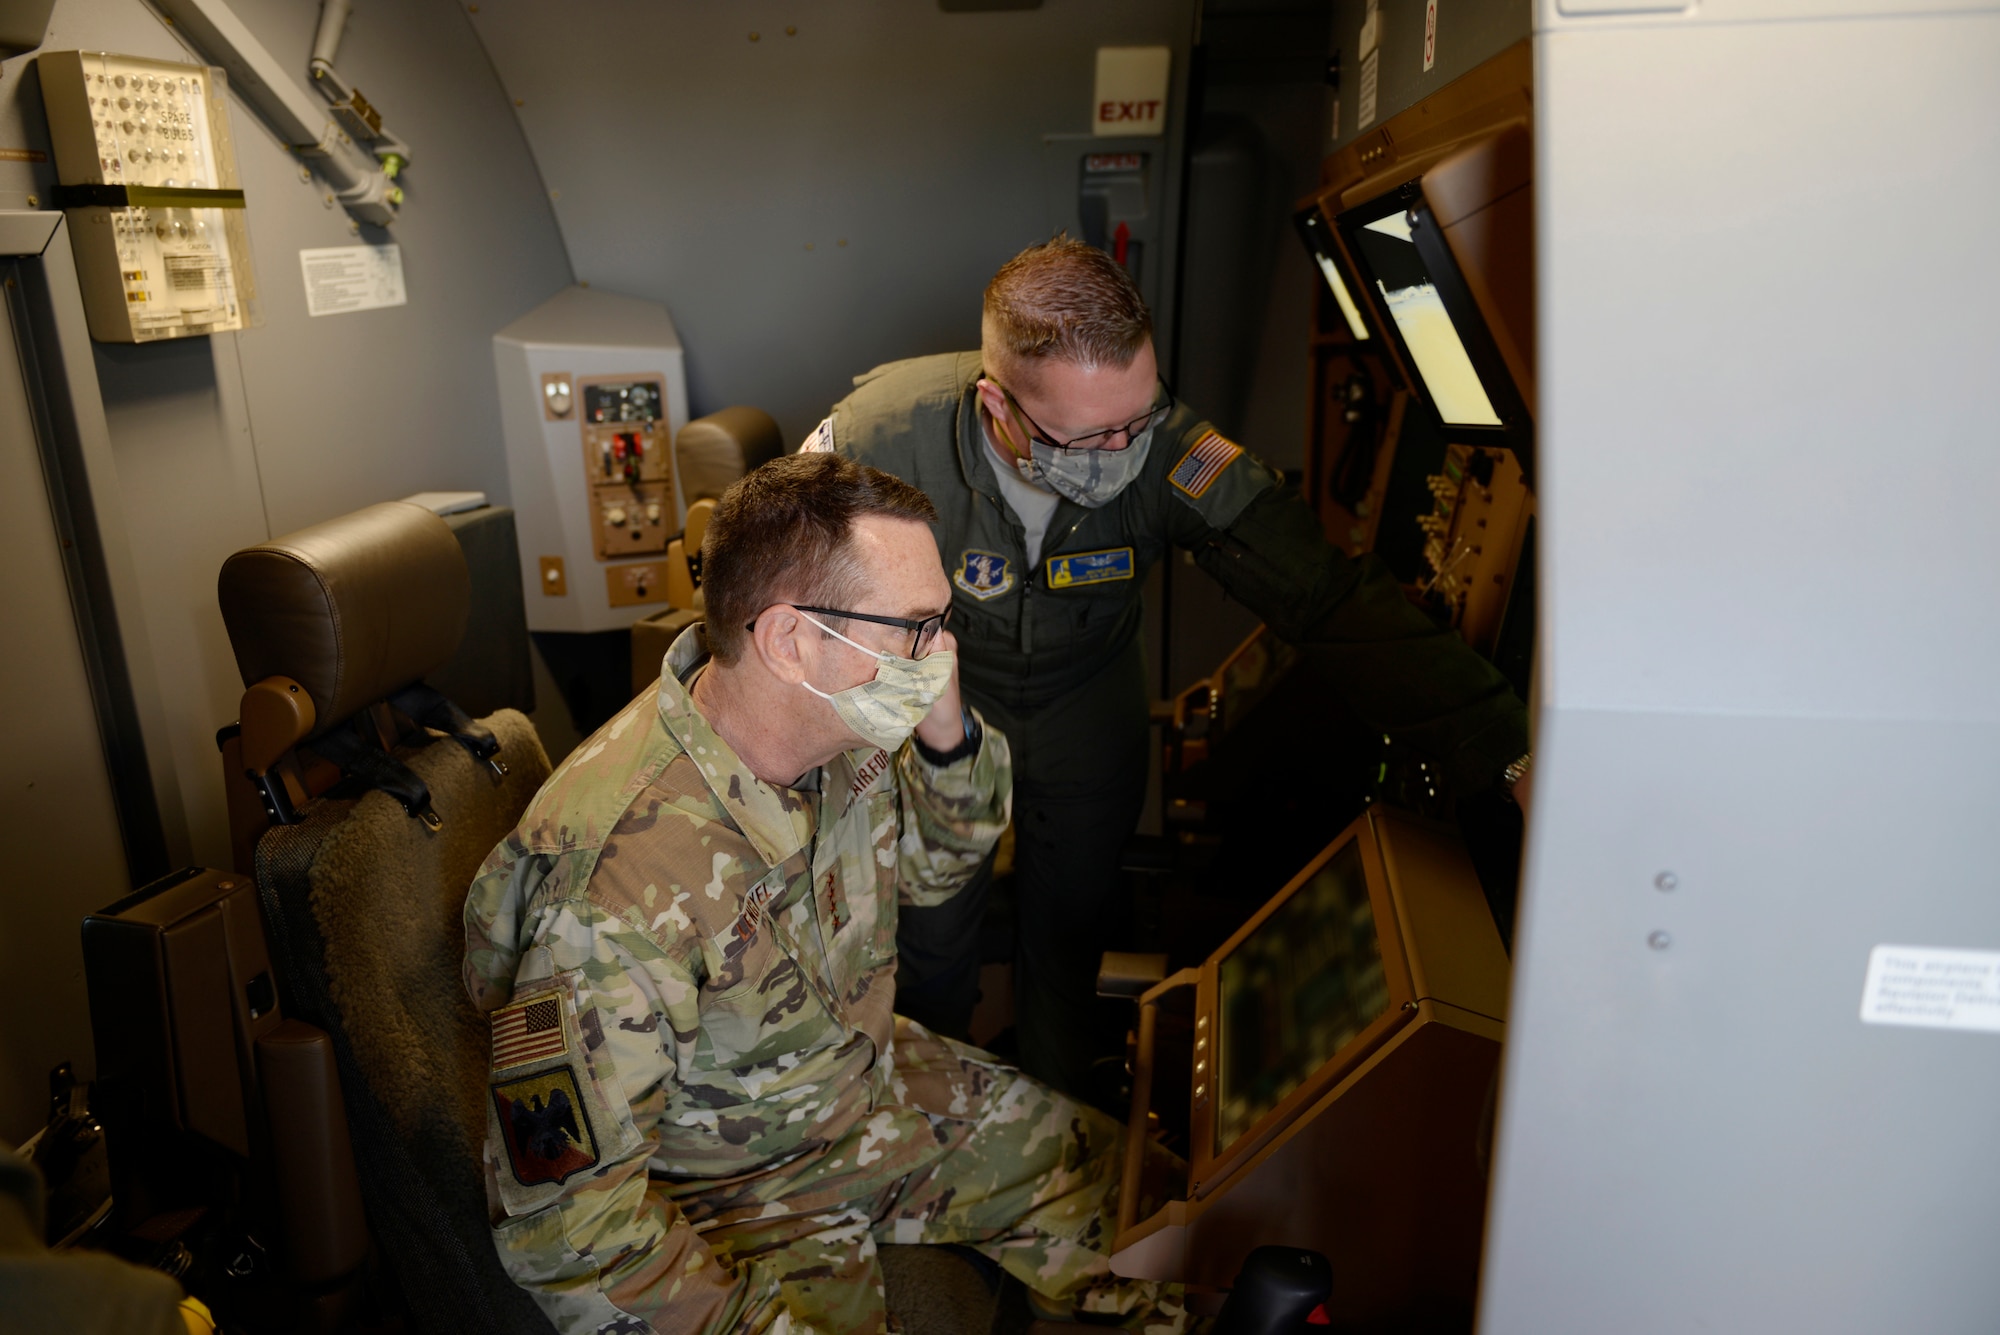 Tech. Sgt. Wayne Reid, a 157th Air Refueling Wing boom operator, demonstrates various aspects of the KC-46A boom controls to Gen. Joseph L. Lengyel, the Chief of the National Guard Bureau, during the general's visit to Pease Air National Guard Base, Newington, N.H., May 27, 2020. (U.S. Air National Guard photo illustration by Senior Master Sgt. Timm Huffman)